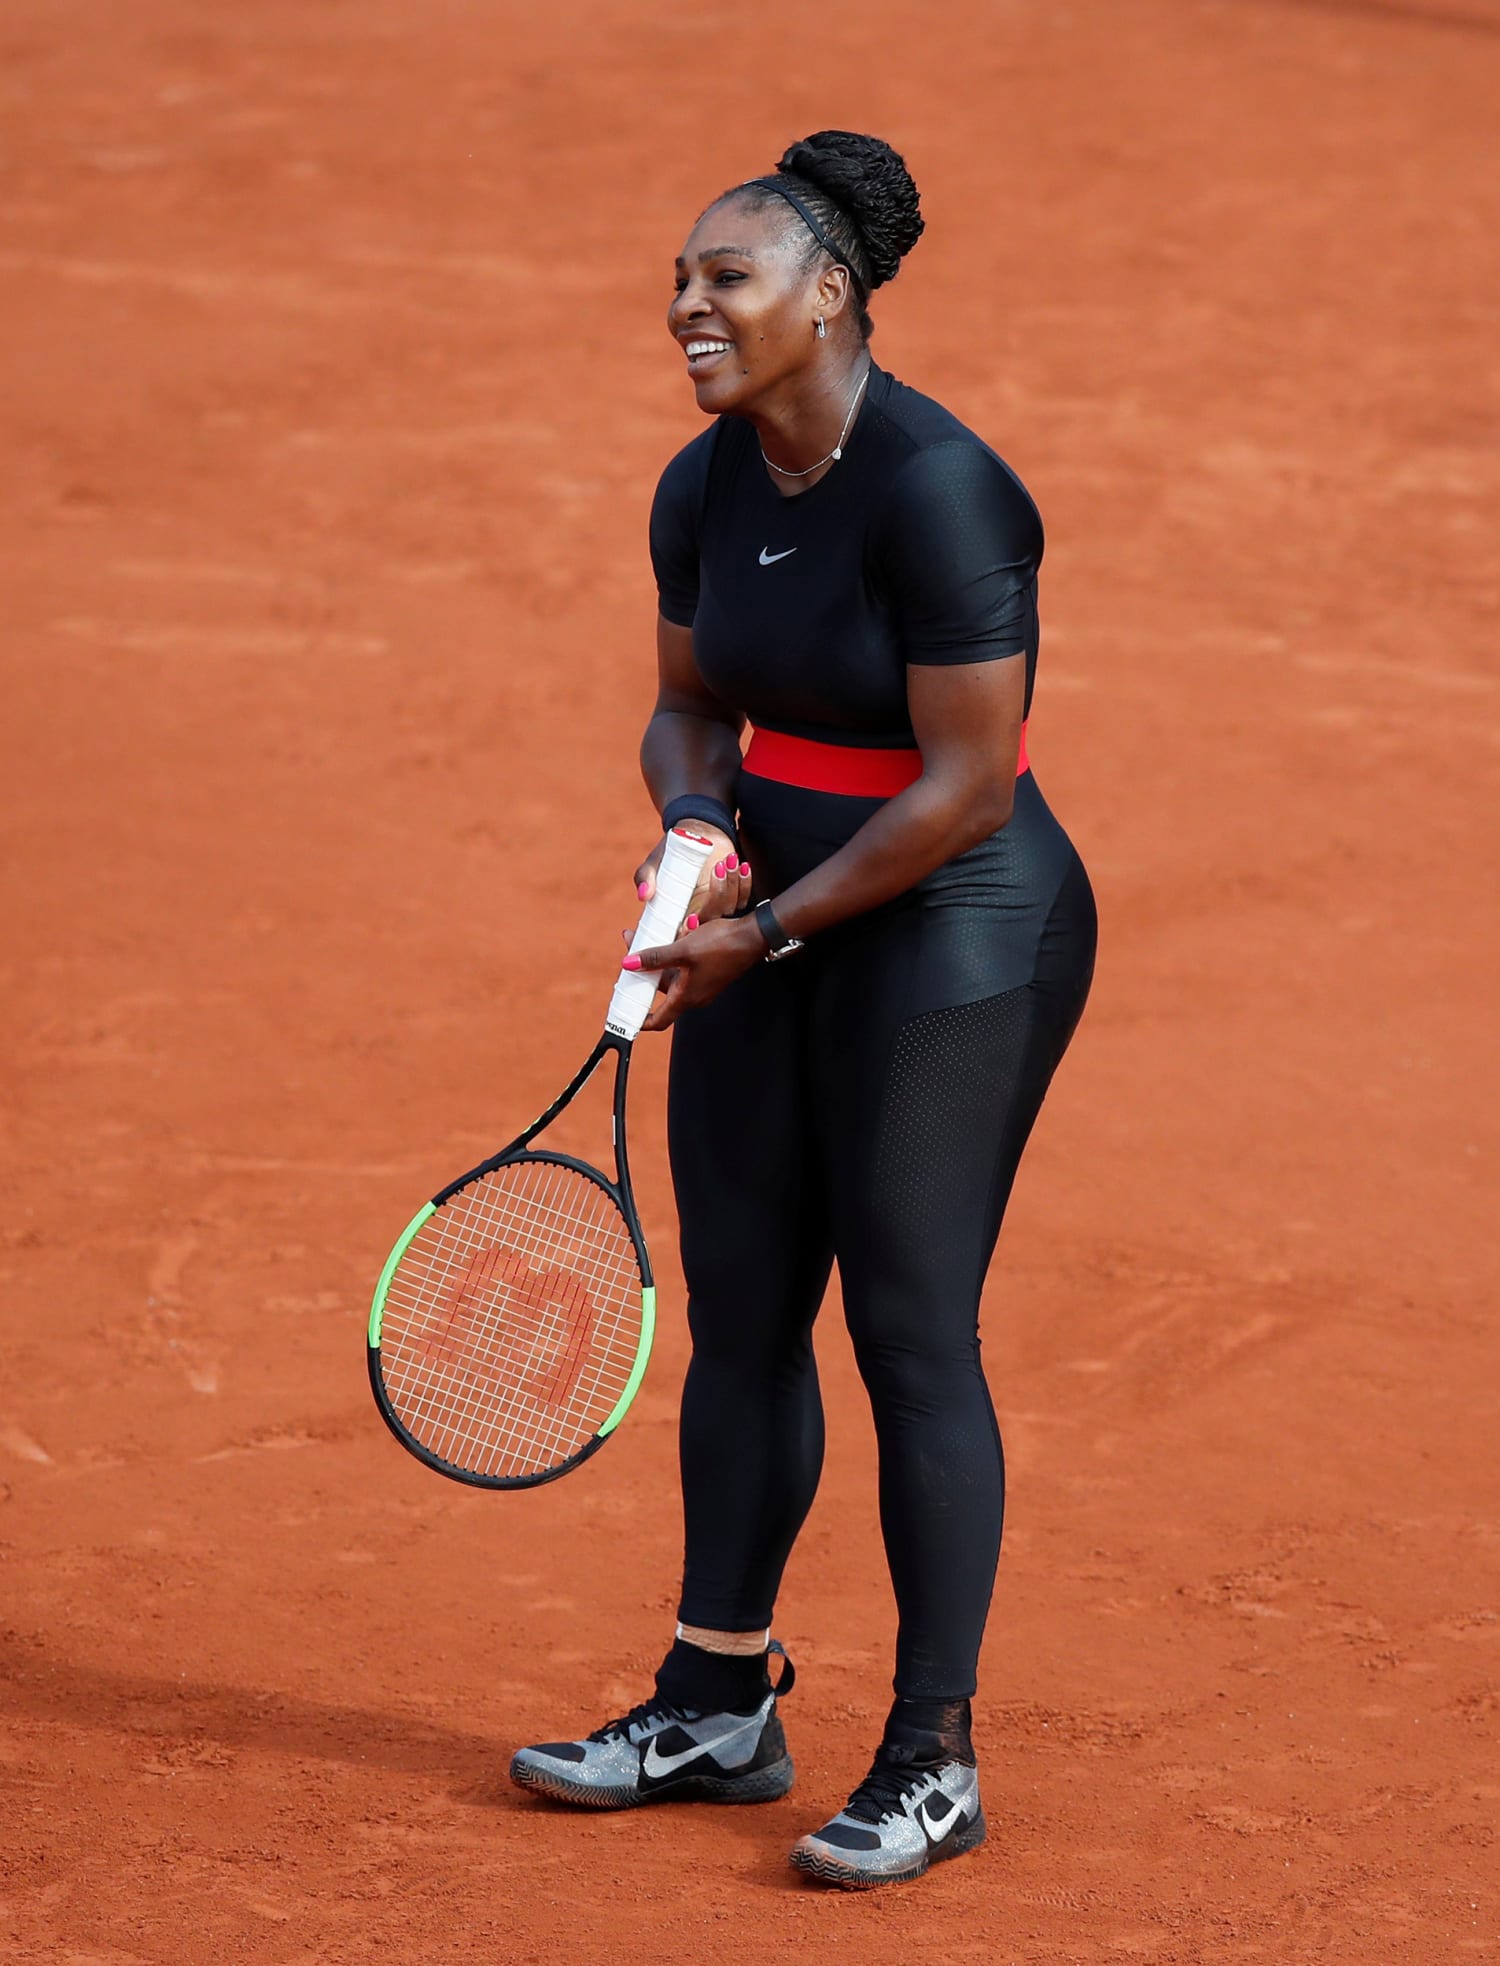 Williams wore a at the 2018 French Open 'for all the moms out there'